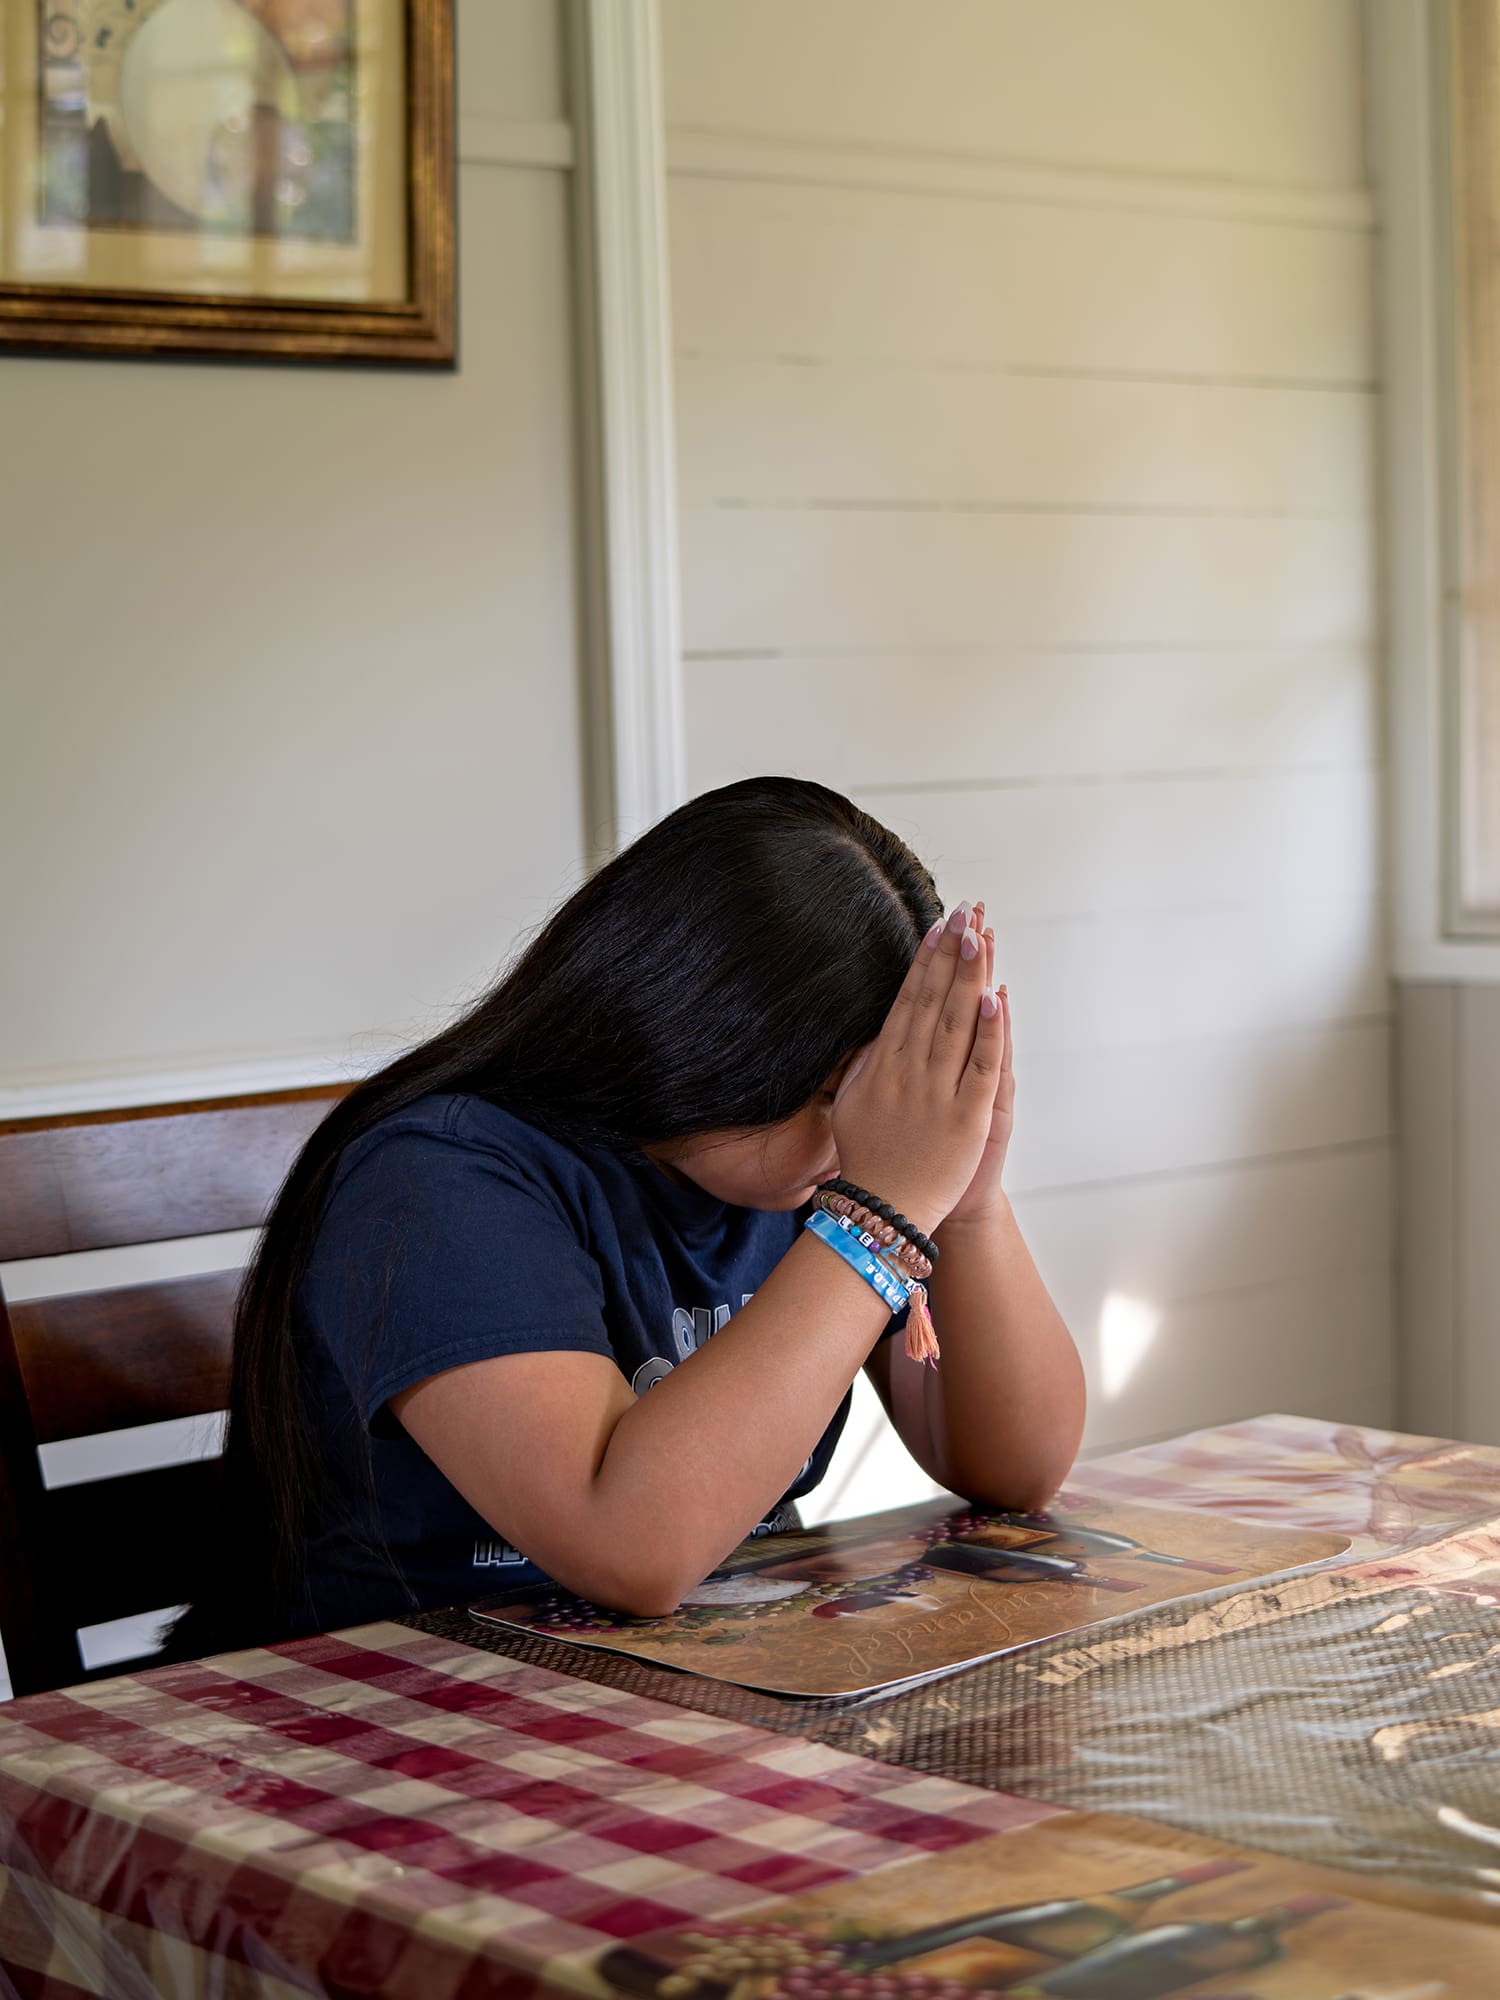 One of Brenda's daughters prays at the kitchen table before the Pilgrim Virgin Statue. Photo by Johnathon Kelso